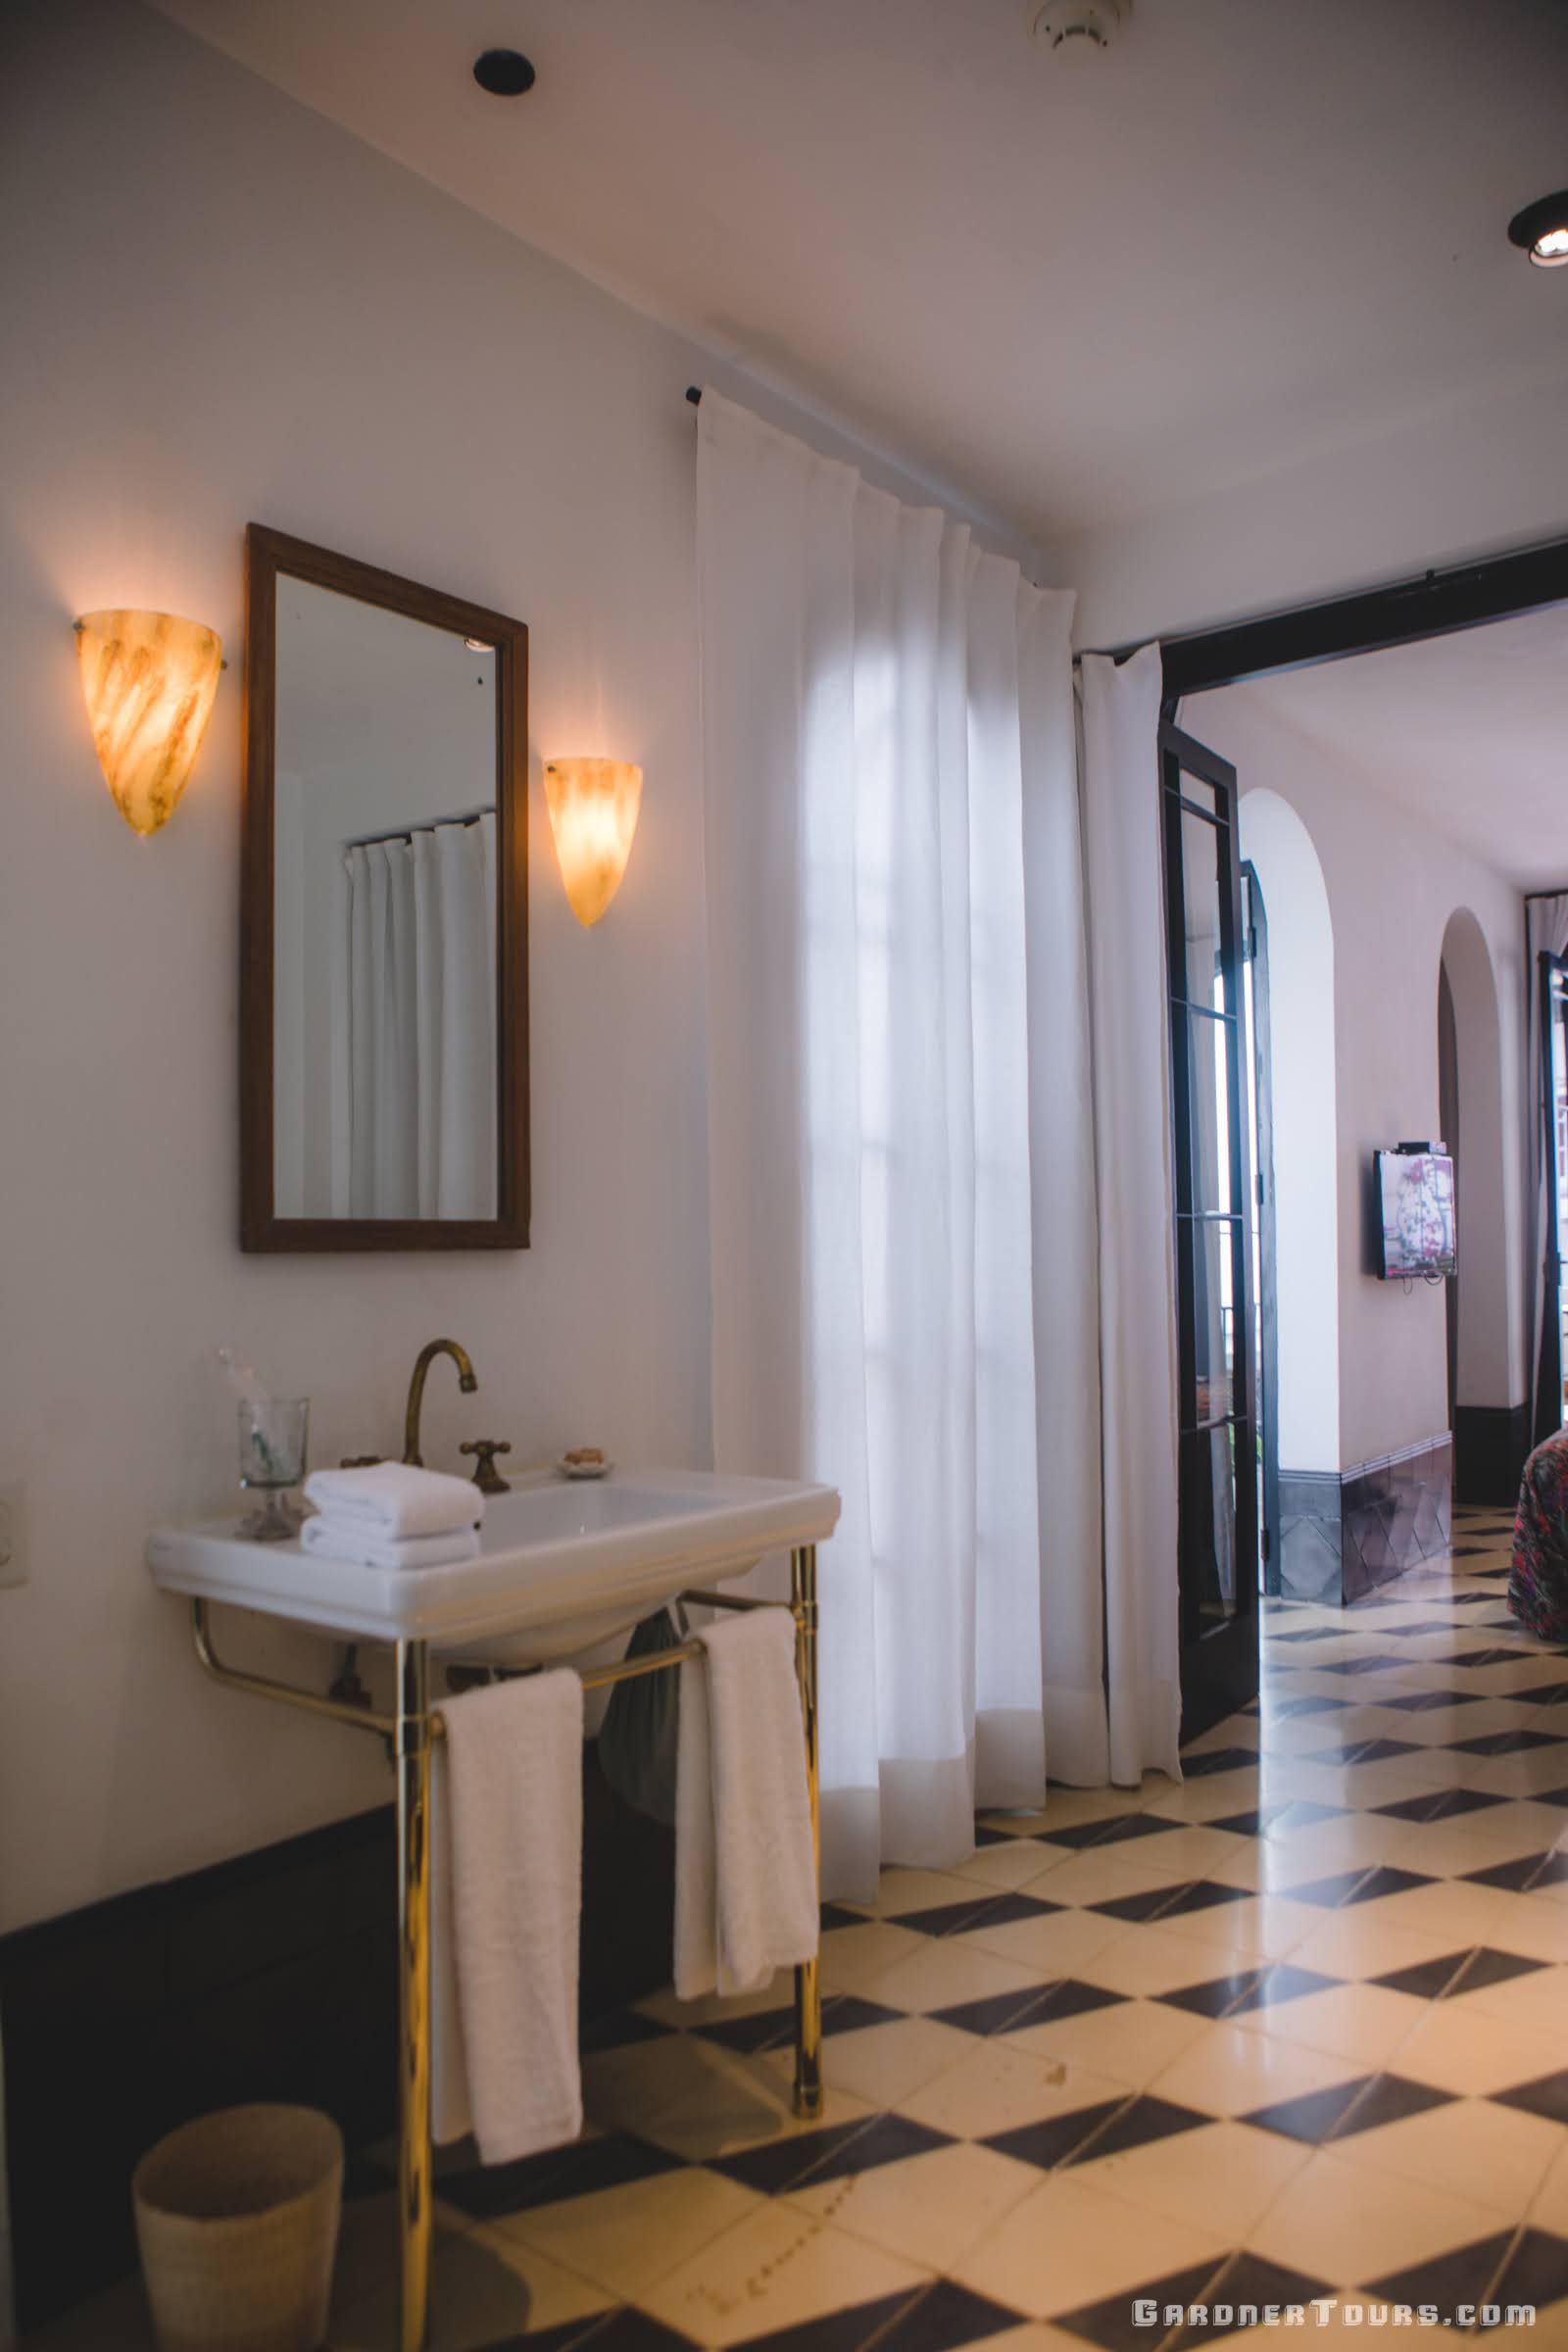 Amazing White and Gold Bathroom with Black and White tile in our 5-star Luxury Accommodations in Old Havana, Cuba